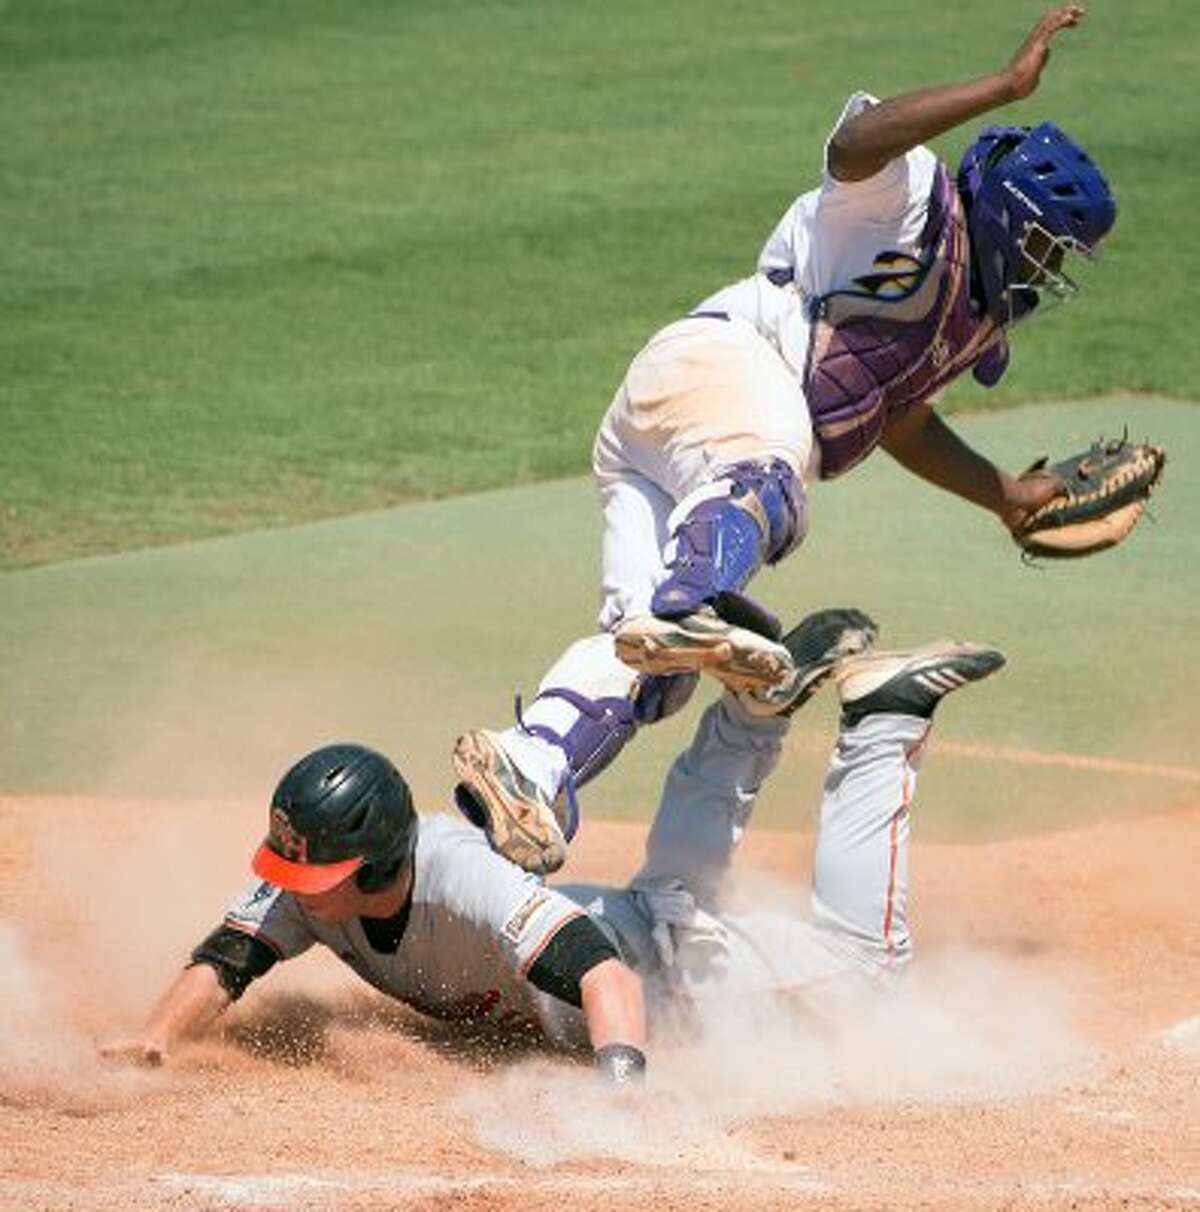 Sam Houston State second baseman Jessie Plumlee slides safely into home as Prairie View catcher Evan Richard tumbles over him during the ninth inning of an NCAA college baseball tournament regional game Saturday, June 2, 2012, in Houston. Sam Houston State won the game 4-2. ( Smiley N. Pool / Houston Chronicle ) (Smiley N. Pool / Houston Chronicle)